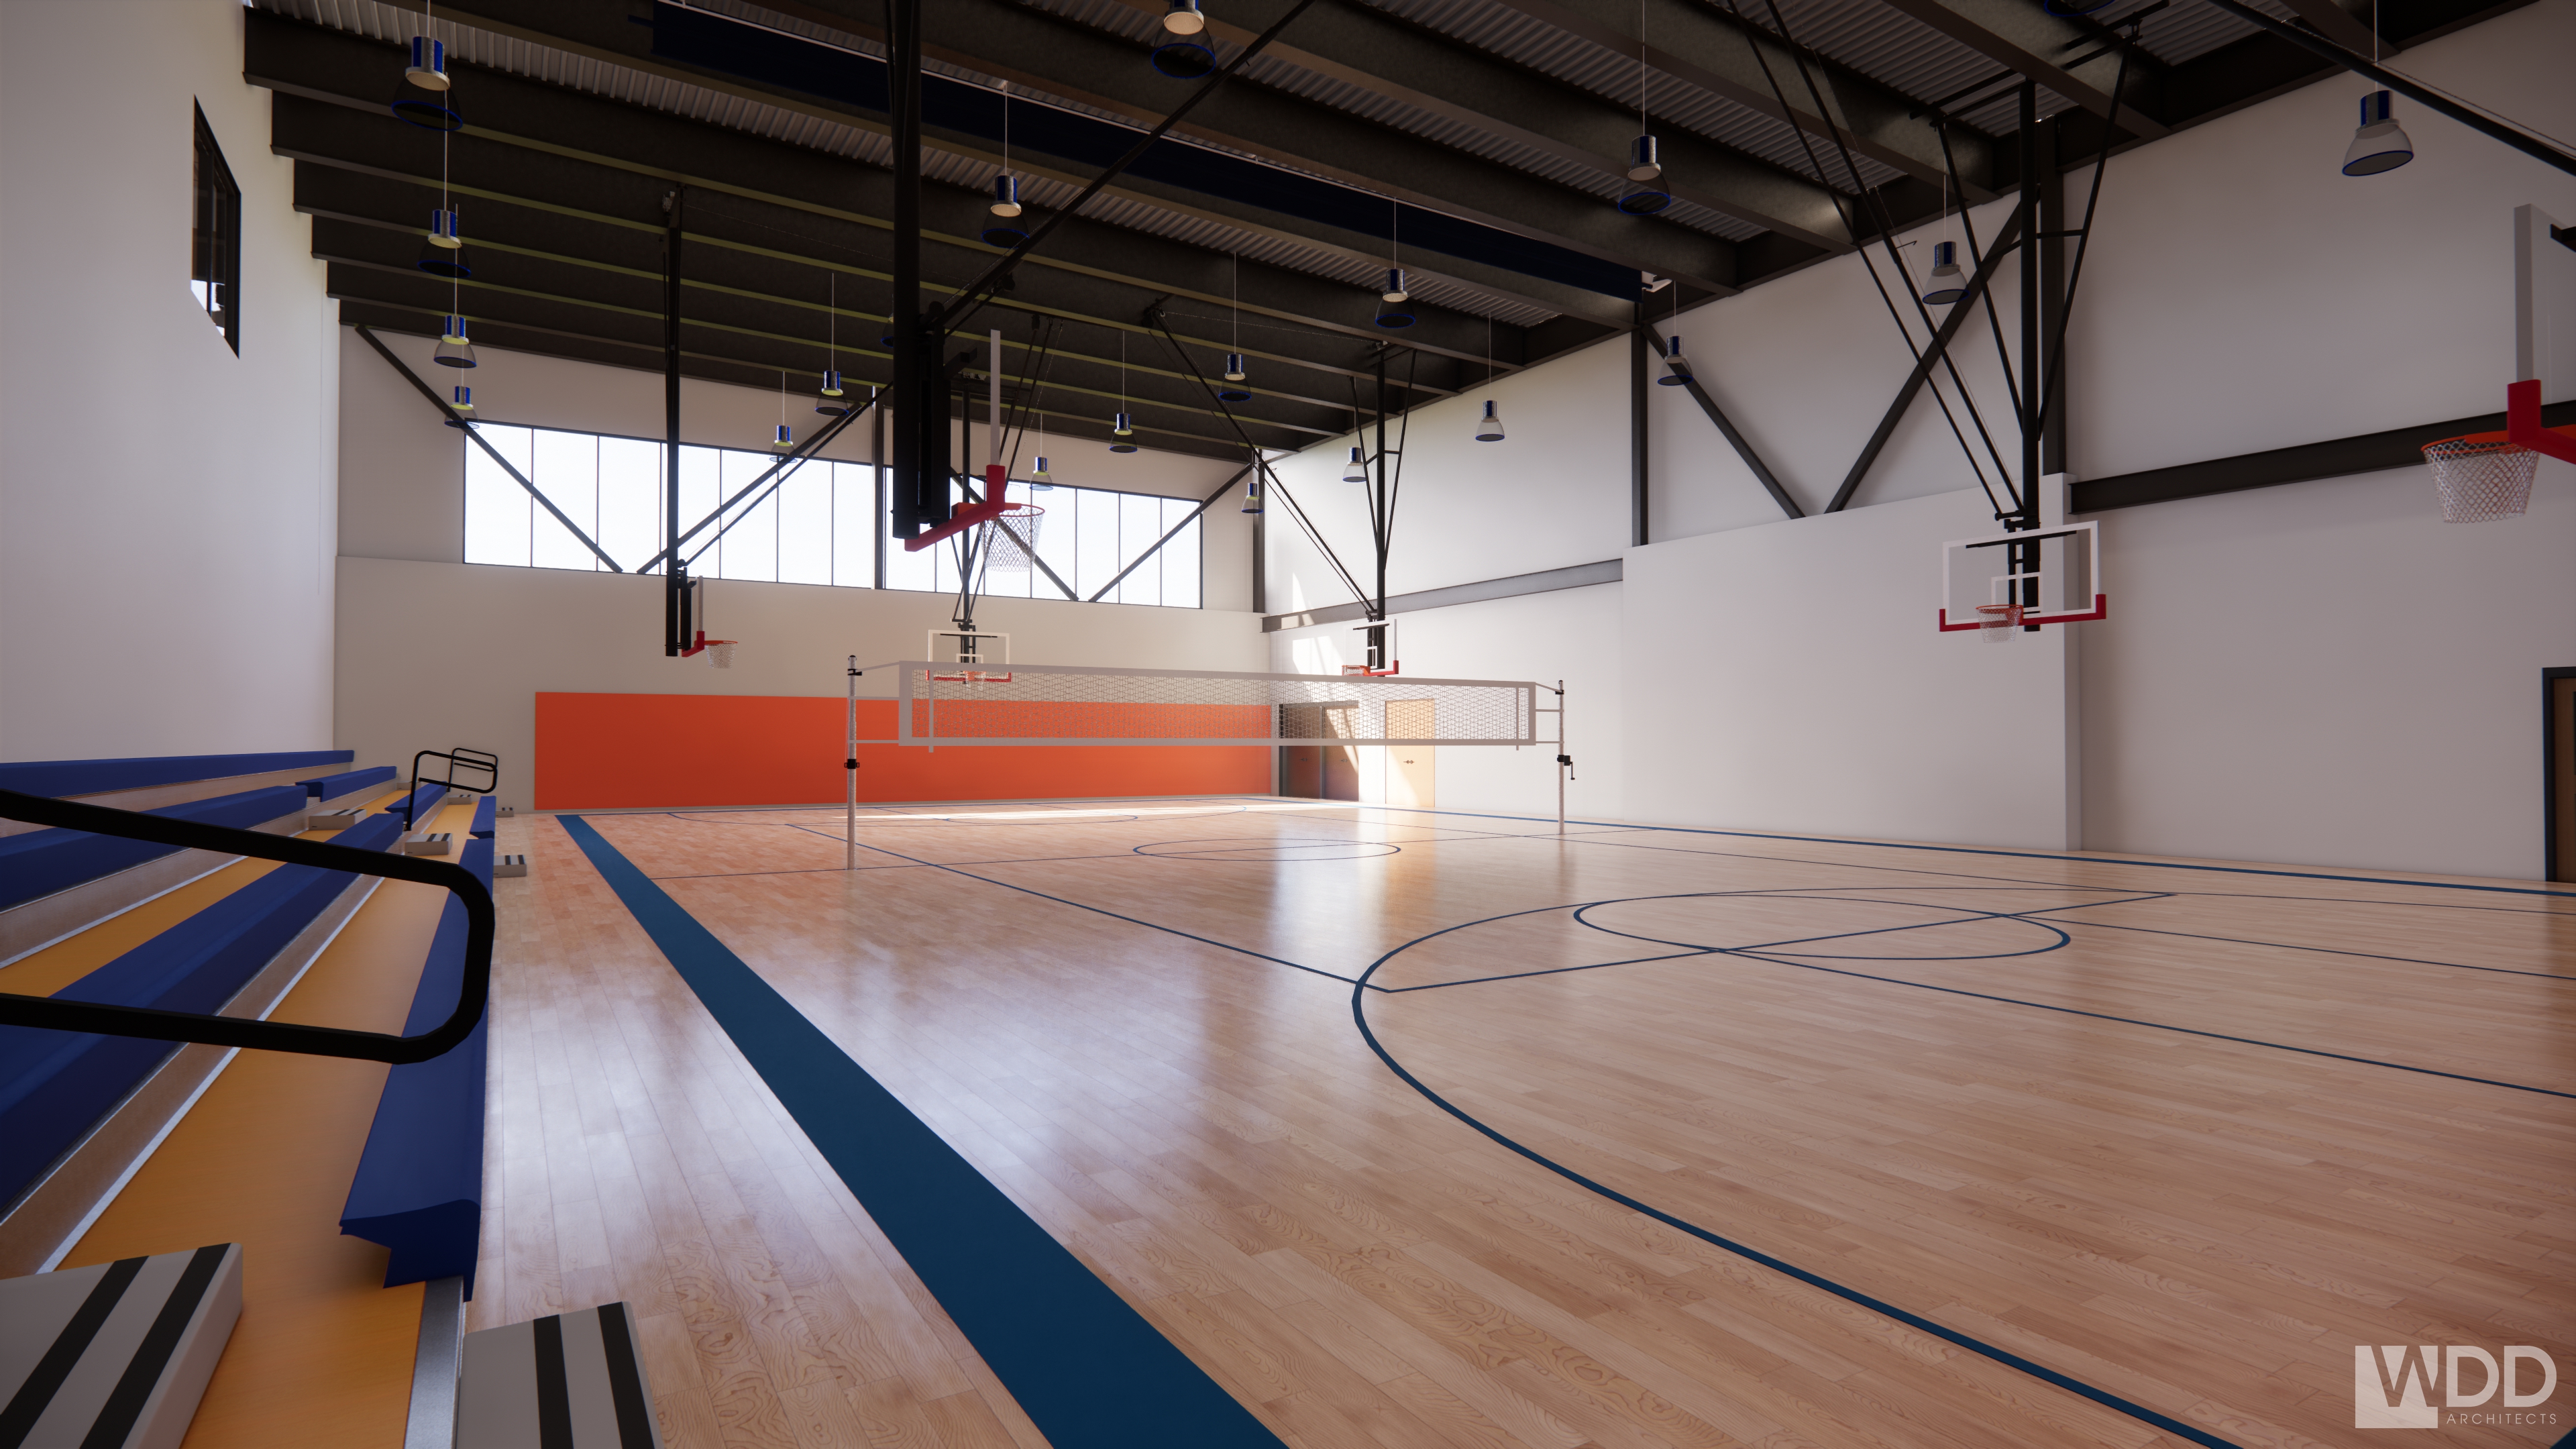 Computer image of the Gym of Southwest Junior High